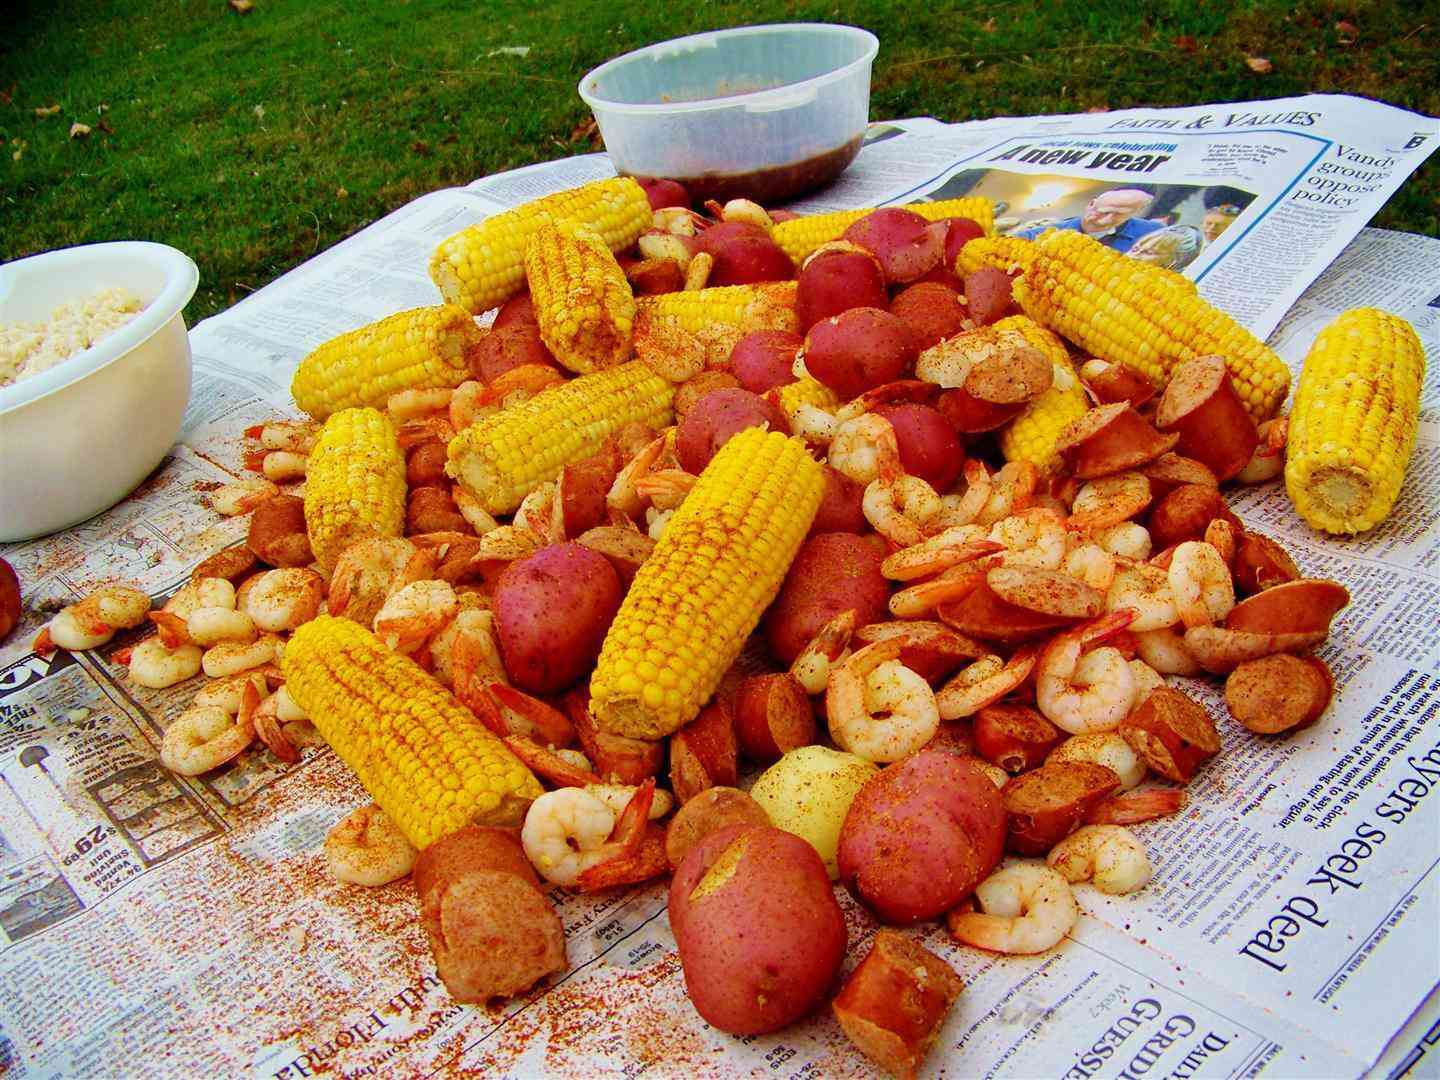 723553_original Daves Low Country Boil by Baasinator spread on newspaper 10.24.11